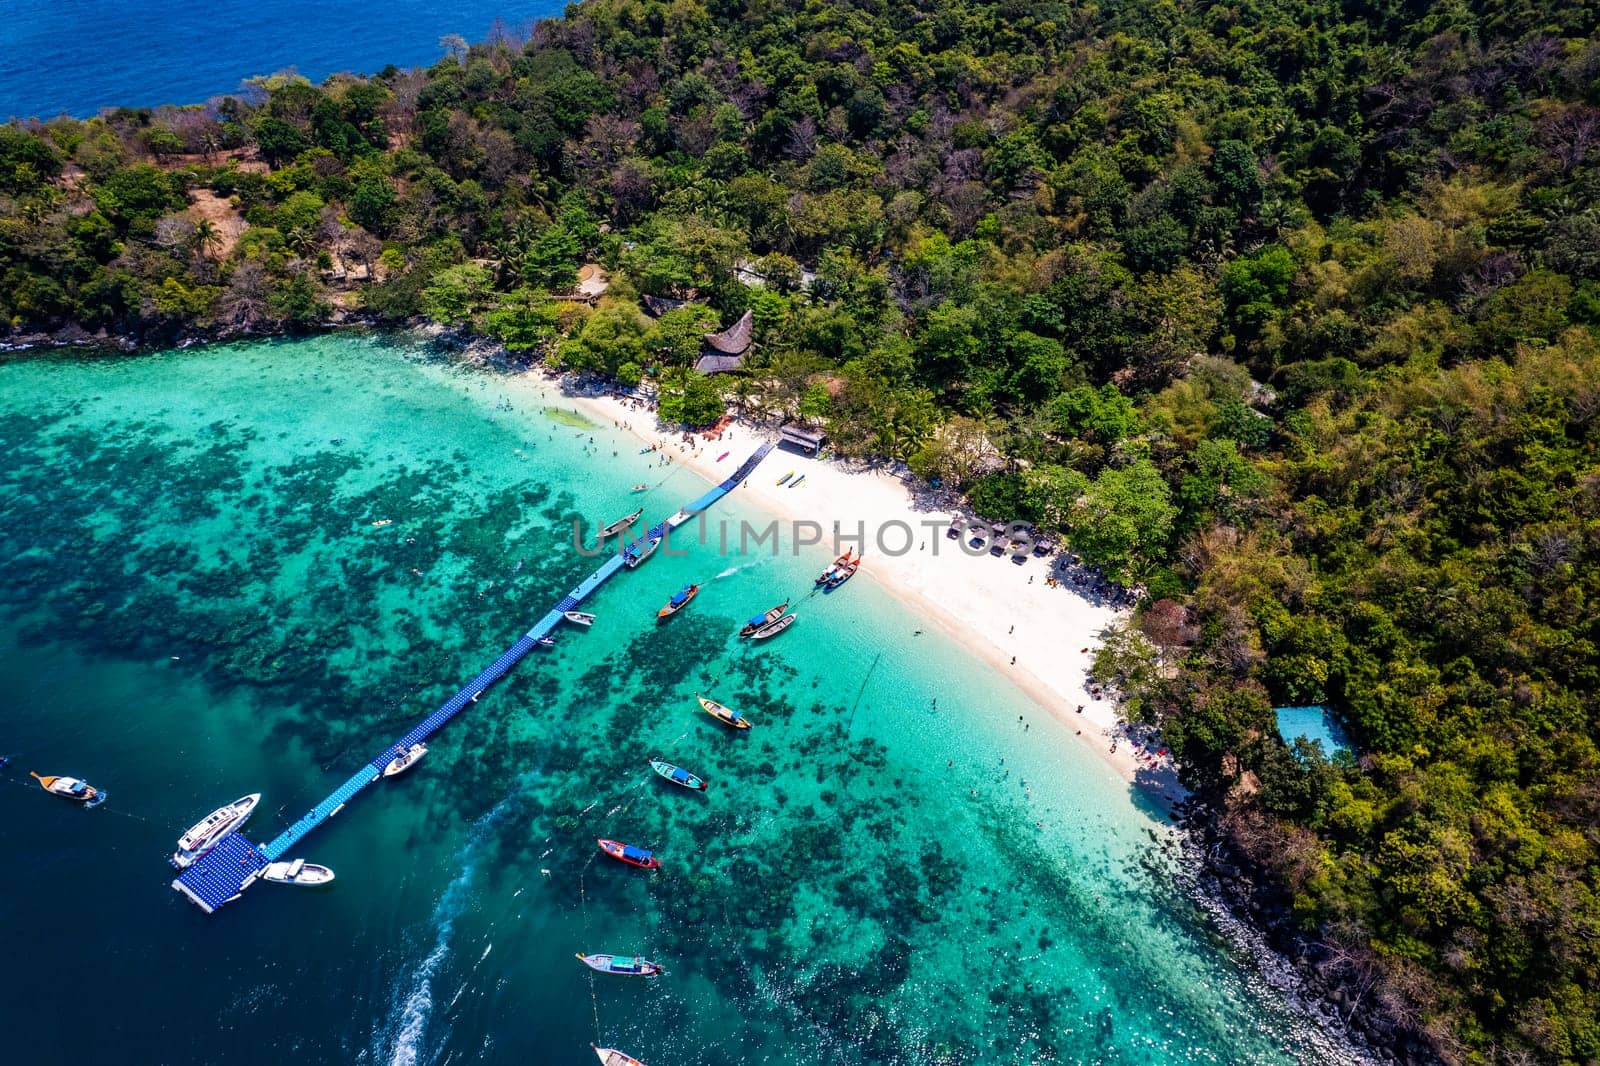 Aerial view of Coral island or Koh hey in Phuket, Thailand by worldpitou